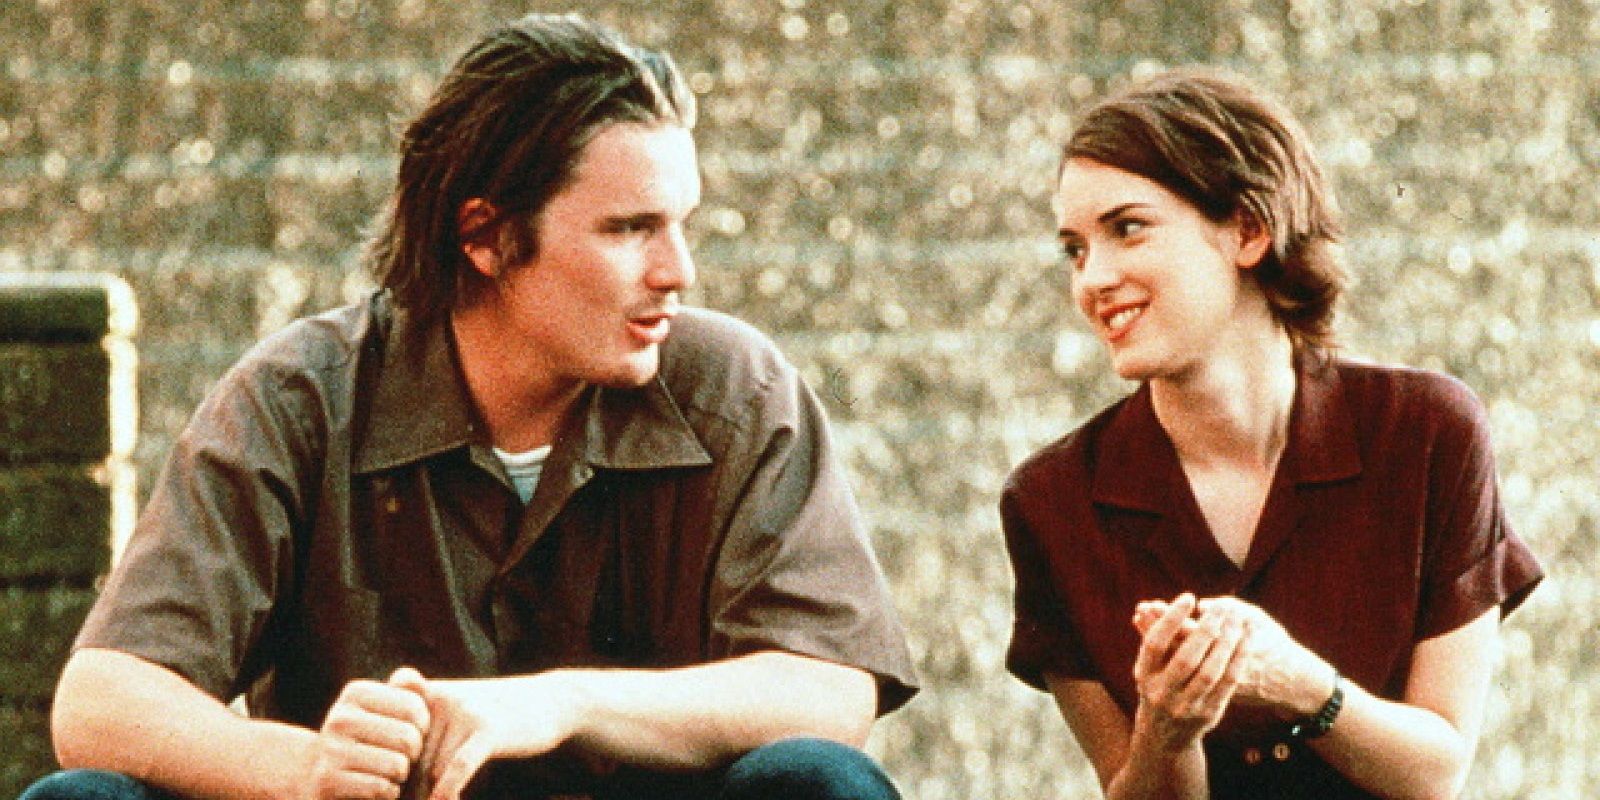 10 Best ’90s Movies With A Grunge Vibe, According To Reddit